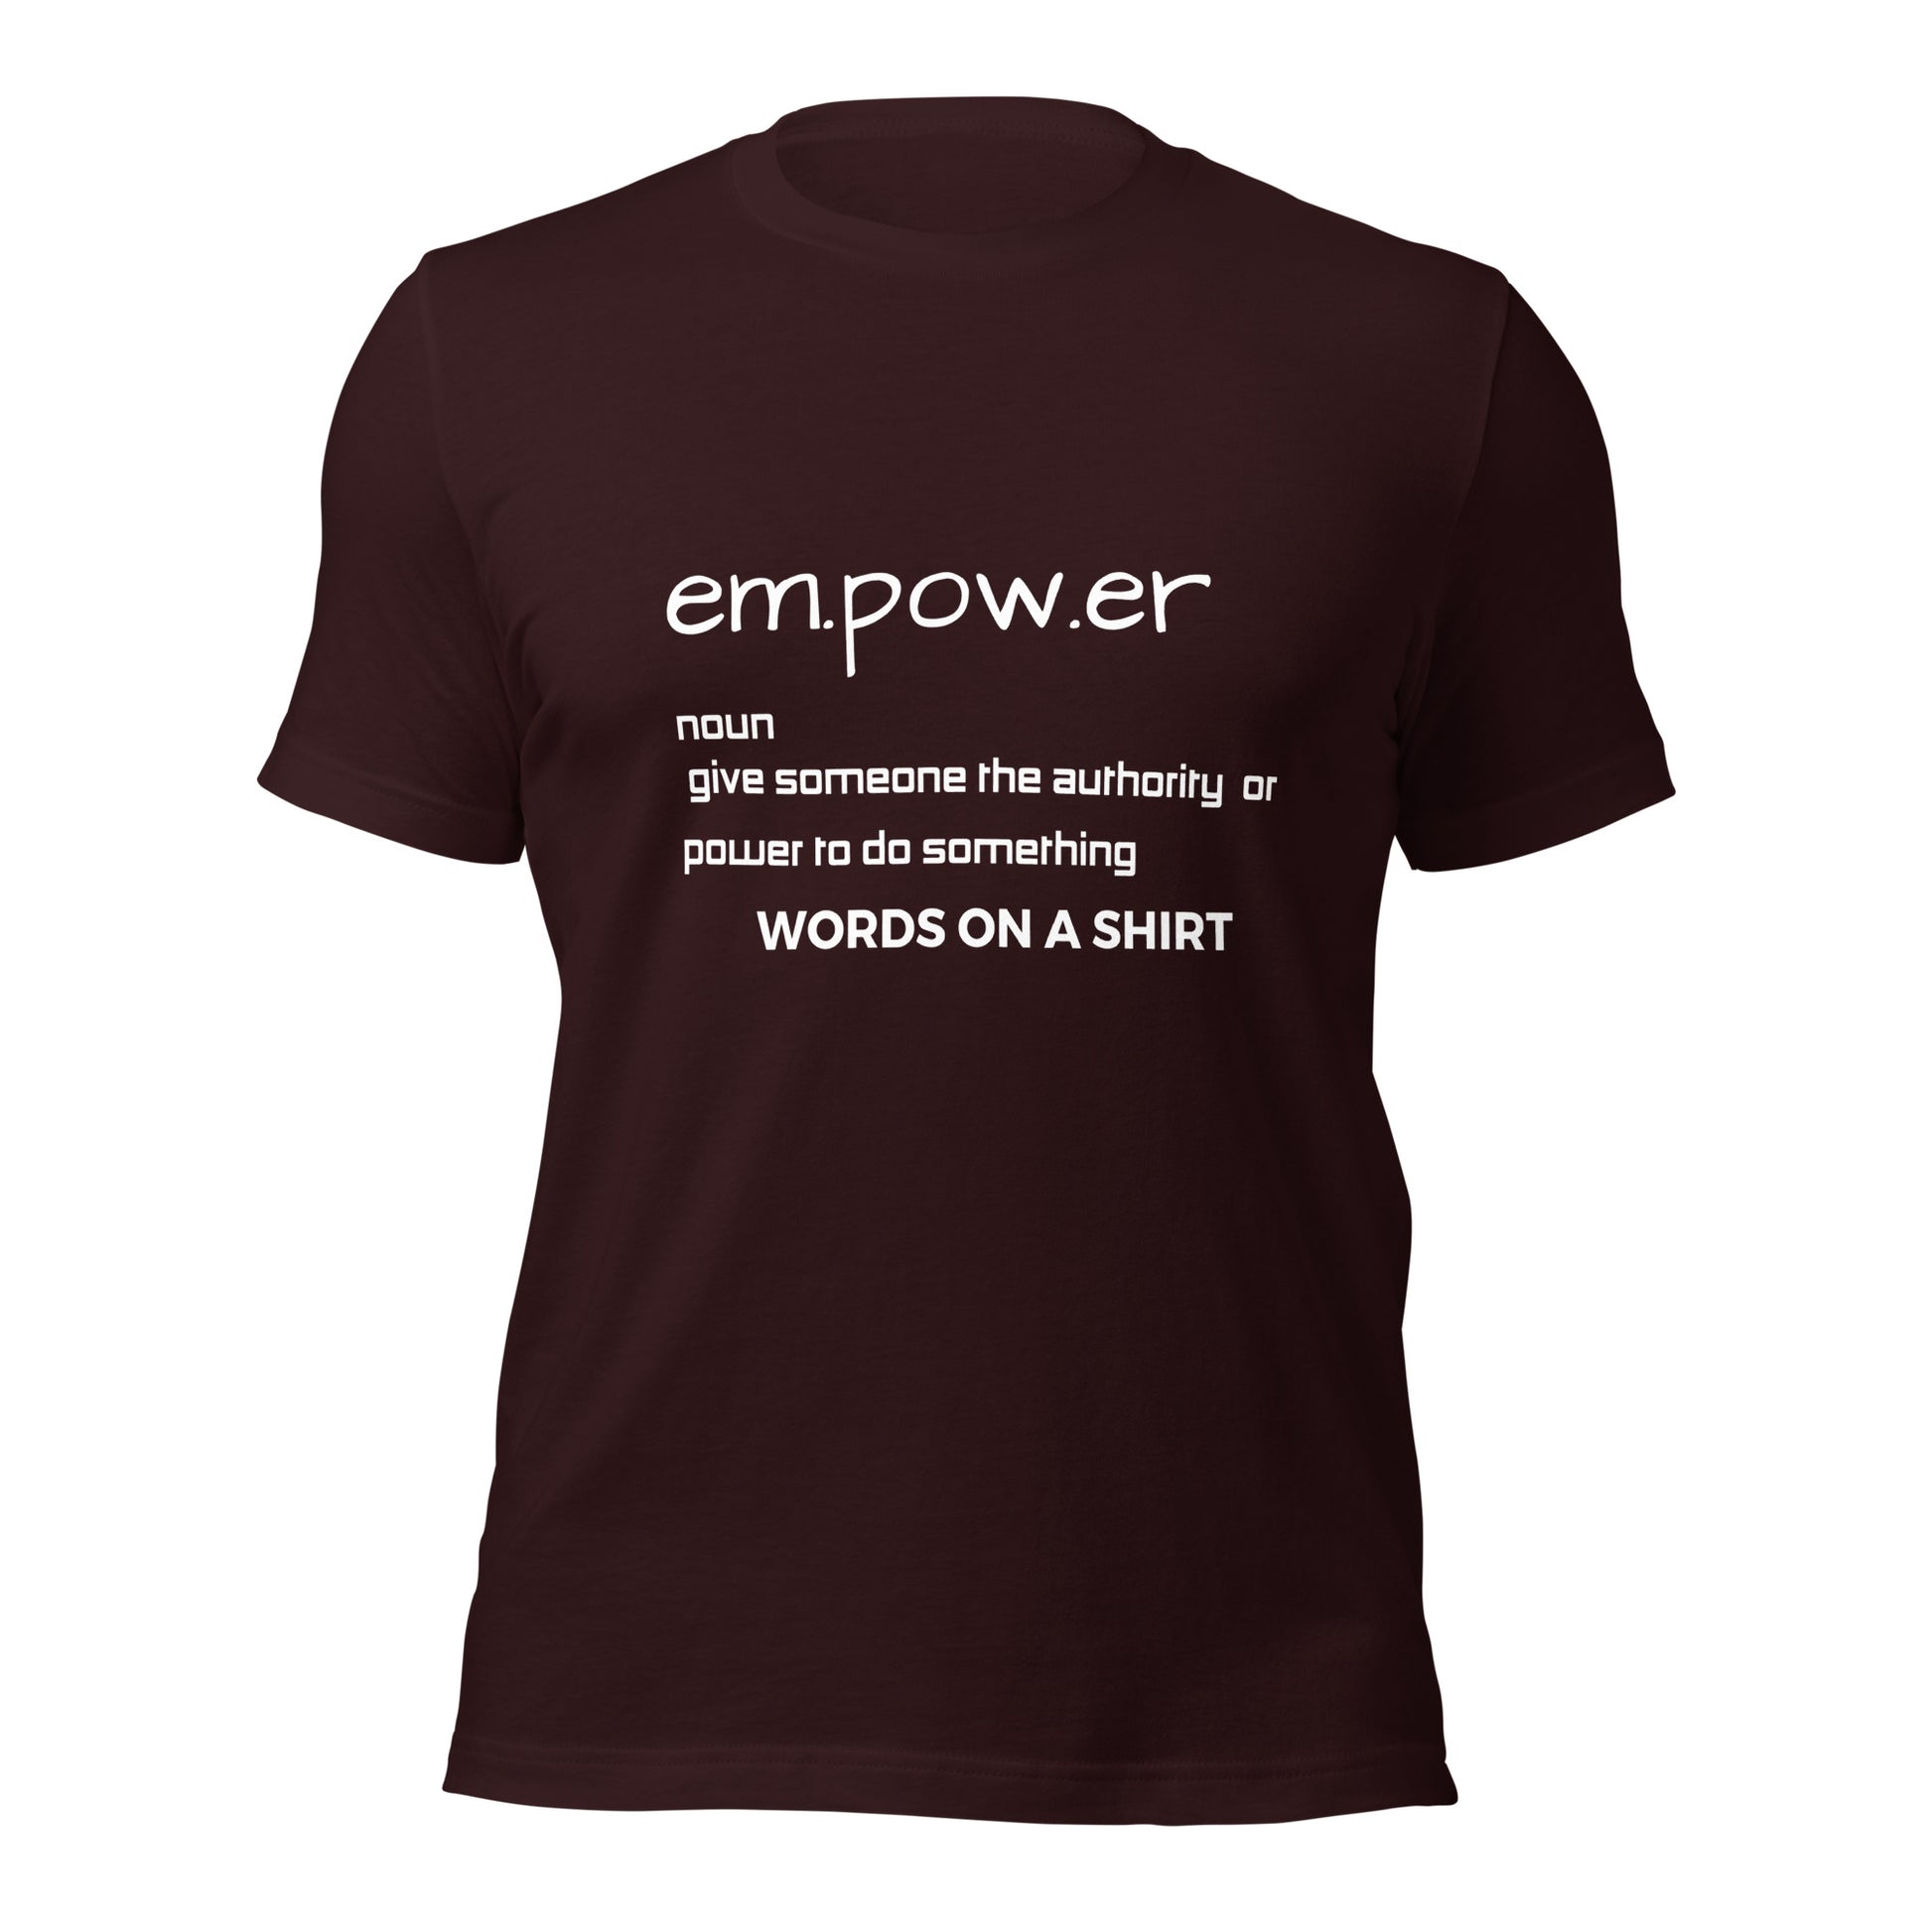 Experience our premium 100% cotton t-shirt with pre-shrunk comfort and side-seamed precision that'll give you the perfect fit. Conquer with Empower Defined!